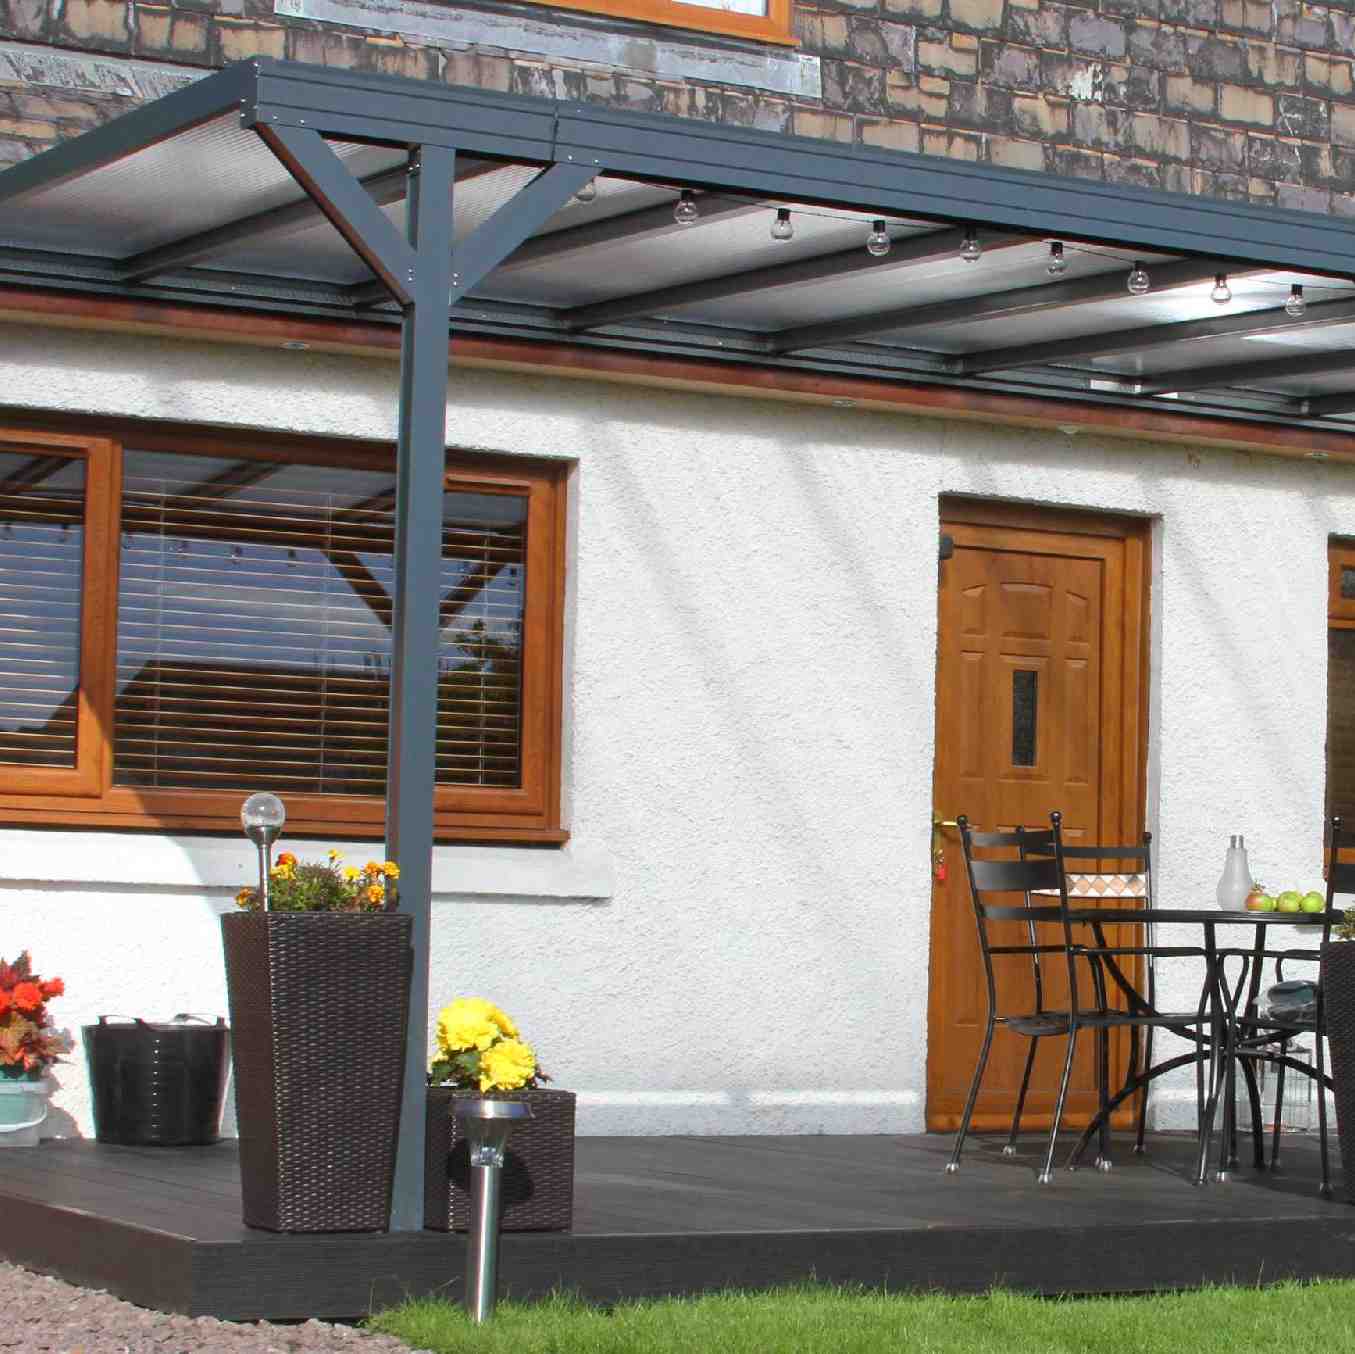 Omega Verandah, Anthracite Grey, 16mm Polycarbonate Glazing - 7.0m (W) x 4.0m (P), (4) Supporting Posts